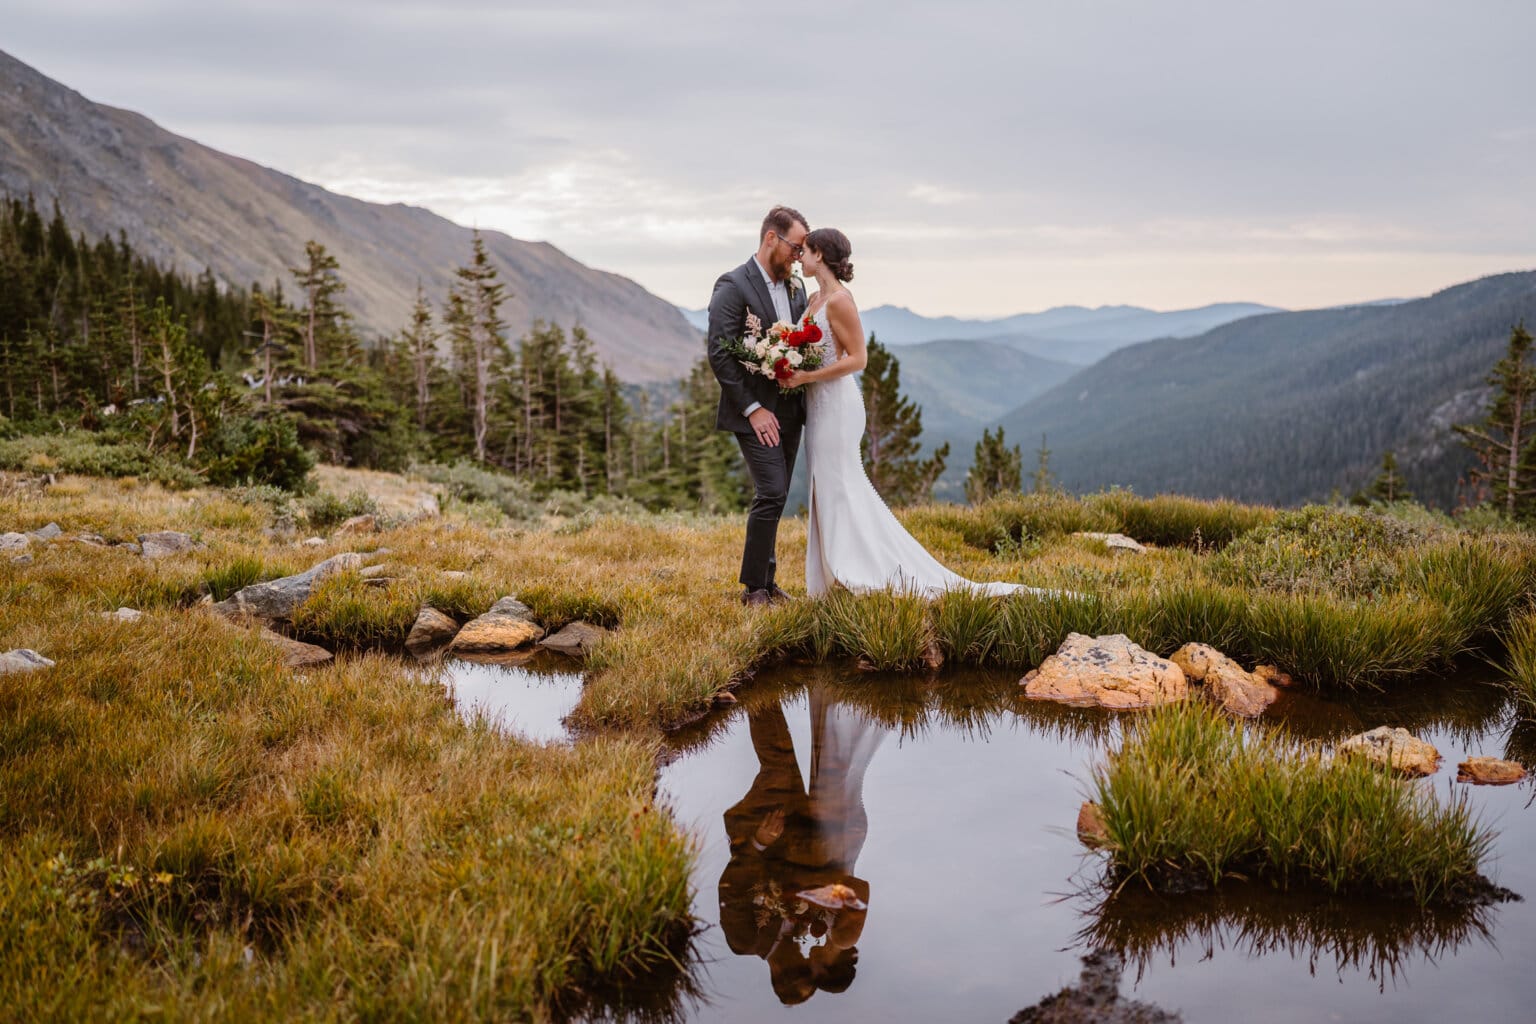 A couple sharing a moment near a tarn in the mountains of Colorado.